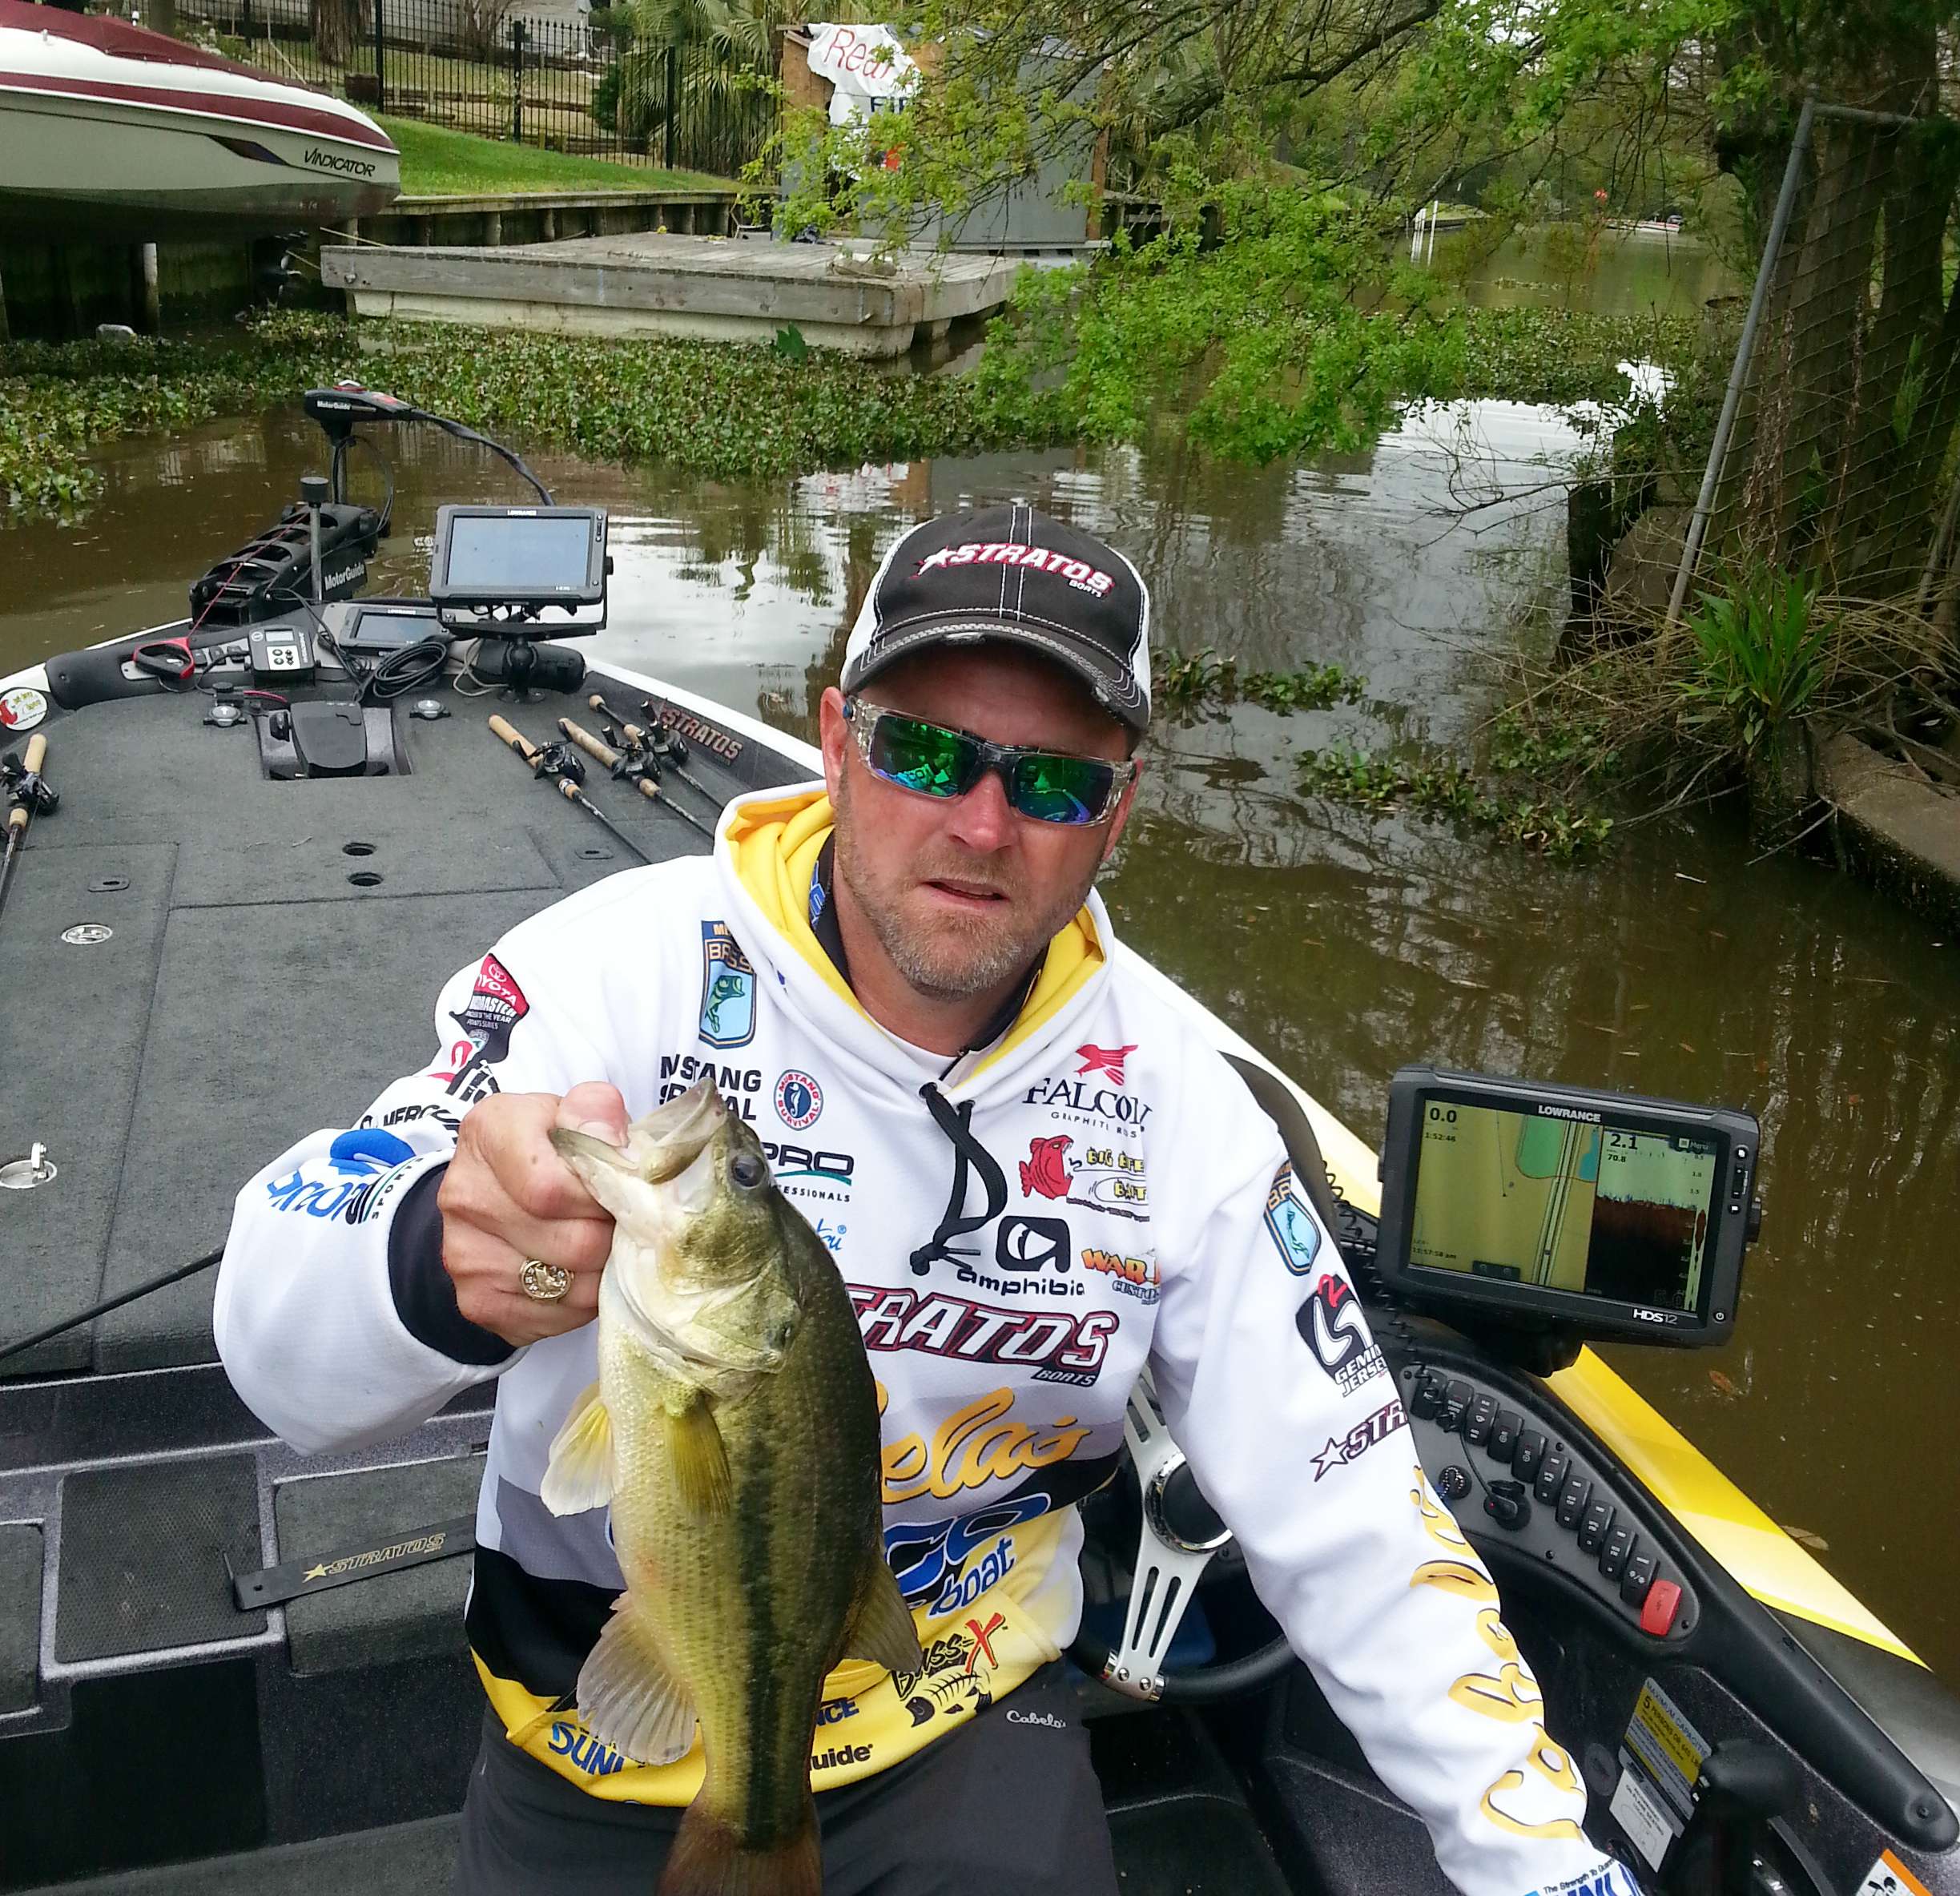 After a long haul, Mike McClelland was on the board.
<br>Photo by Bassmaster Marshal Melvin Dunn